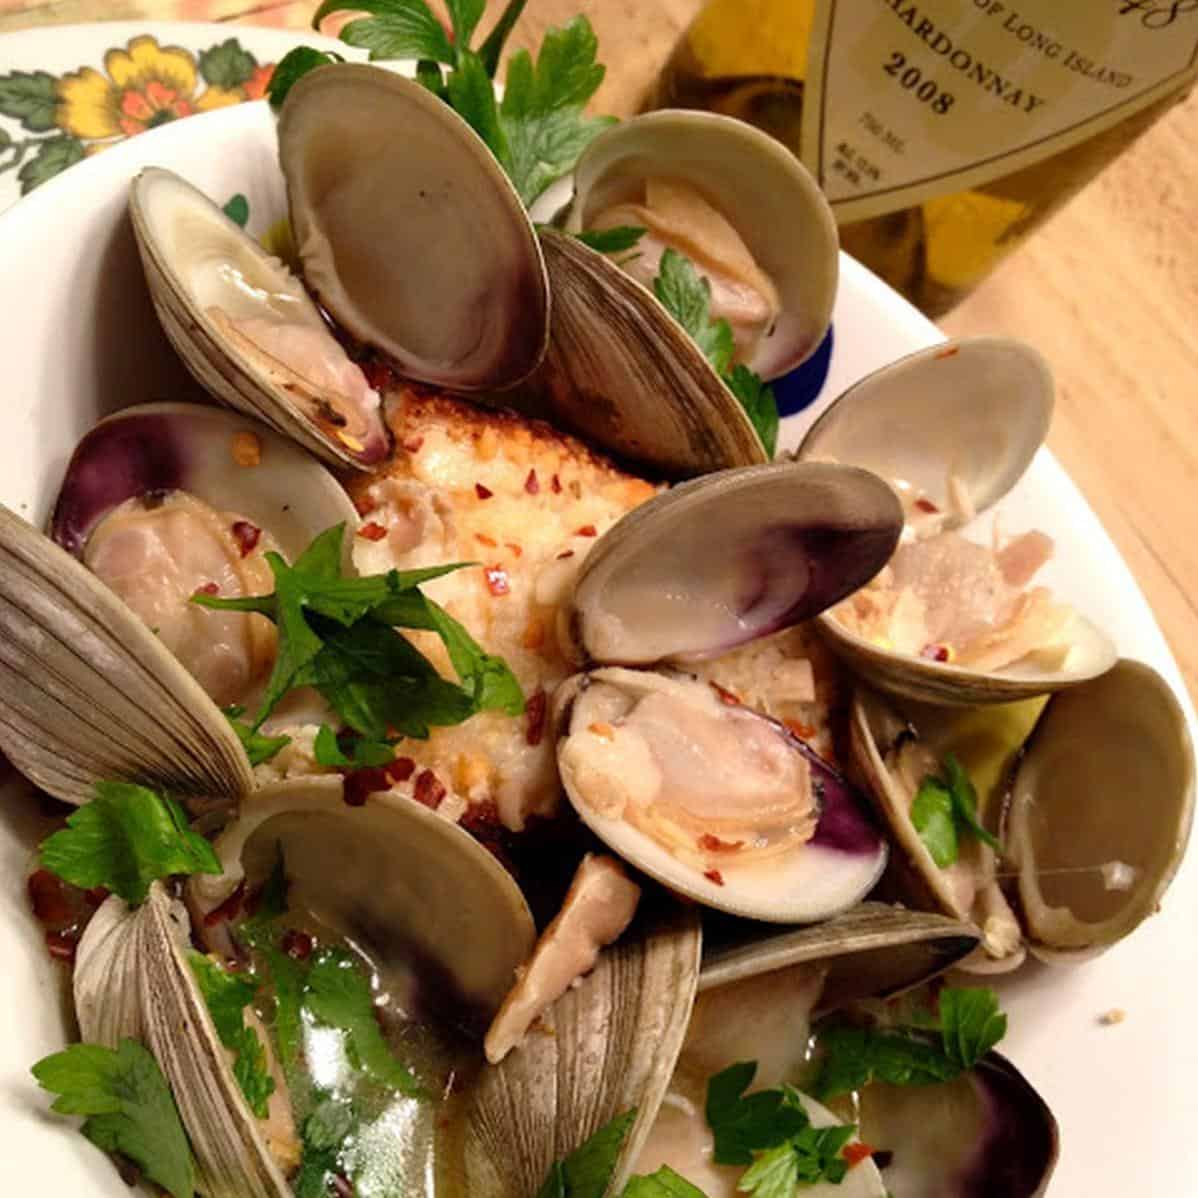  Seafood lovers rejoice! Zuppa De Clams